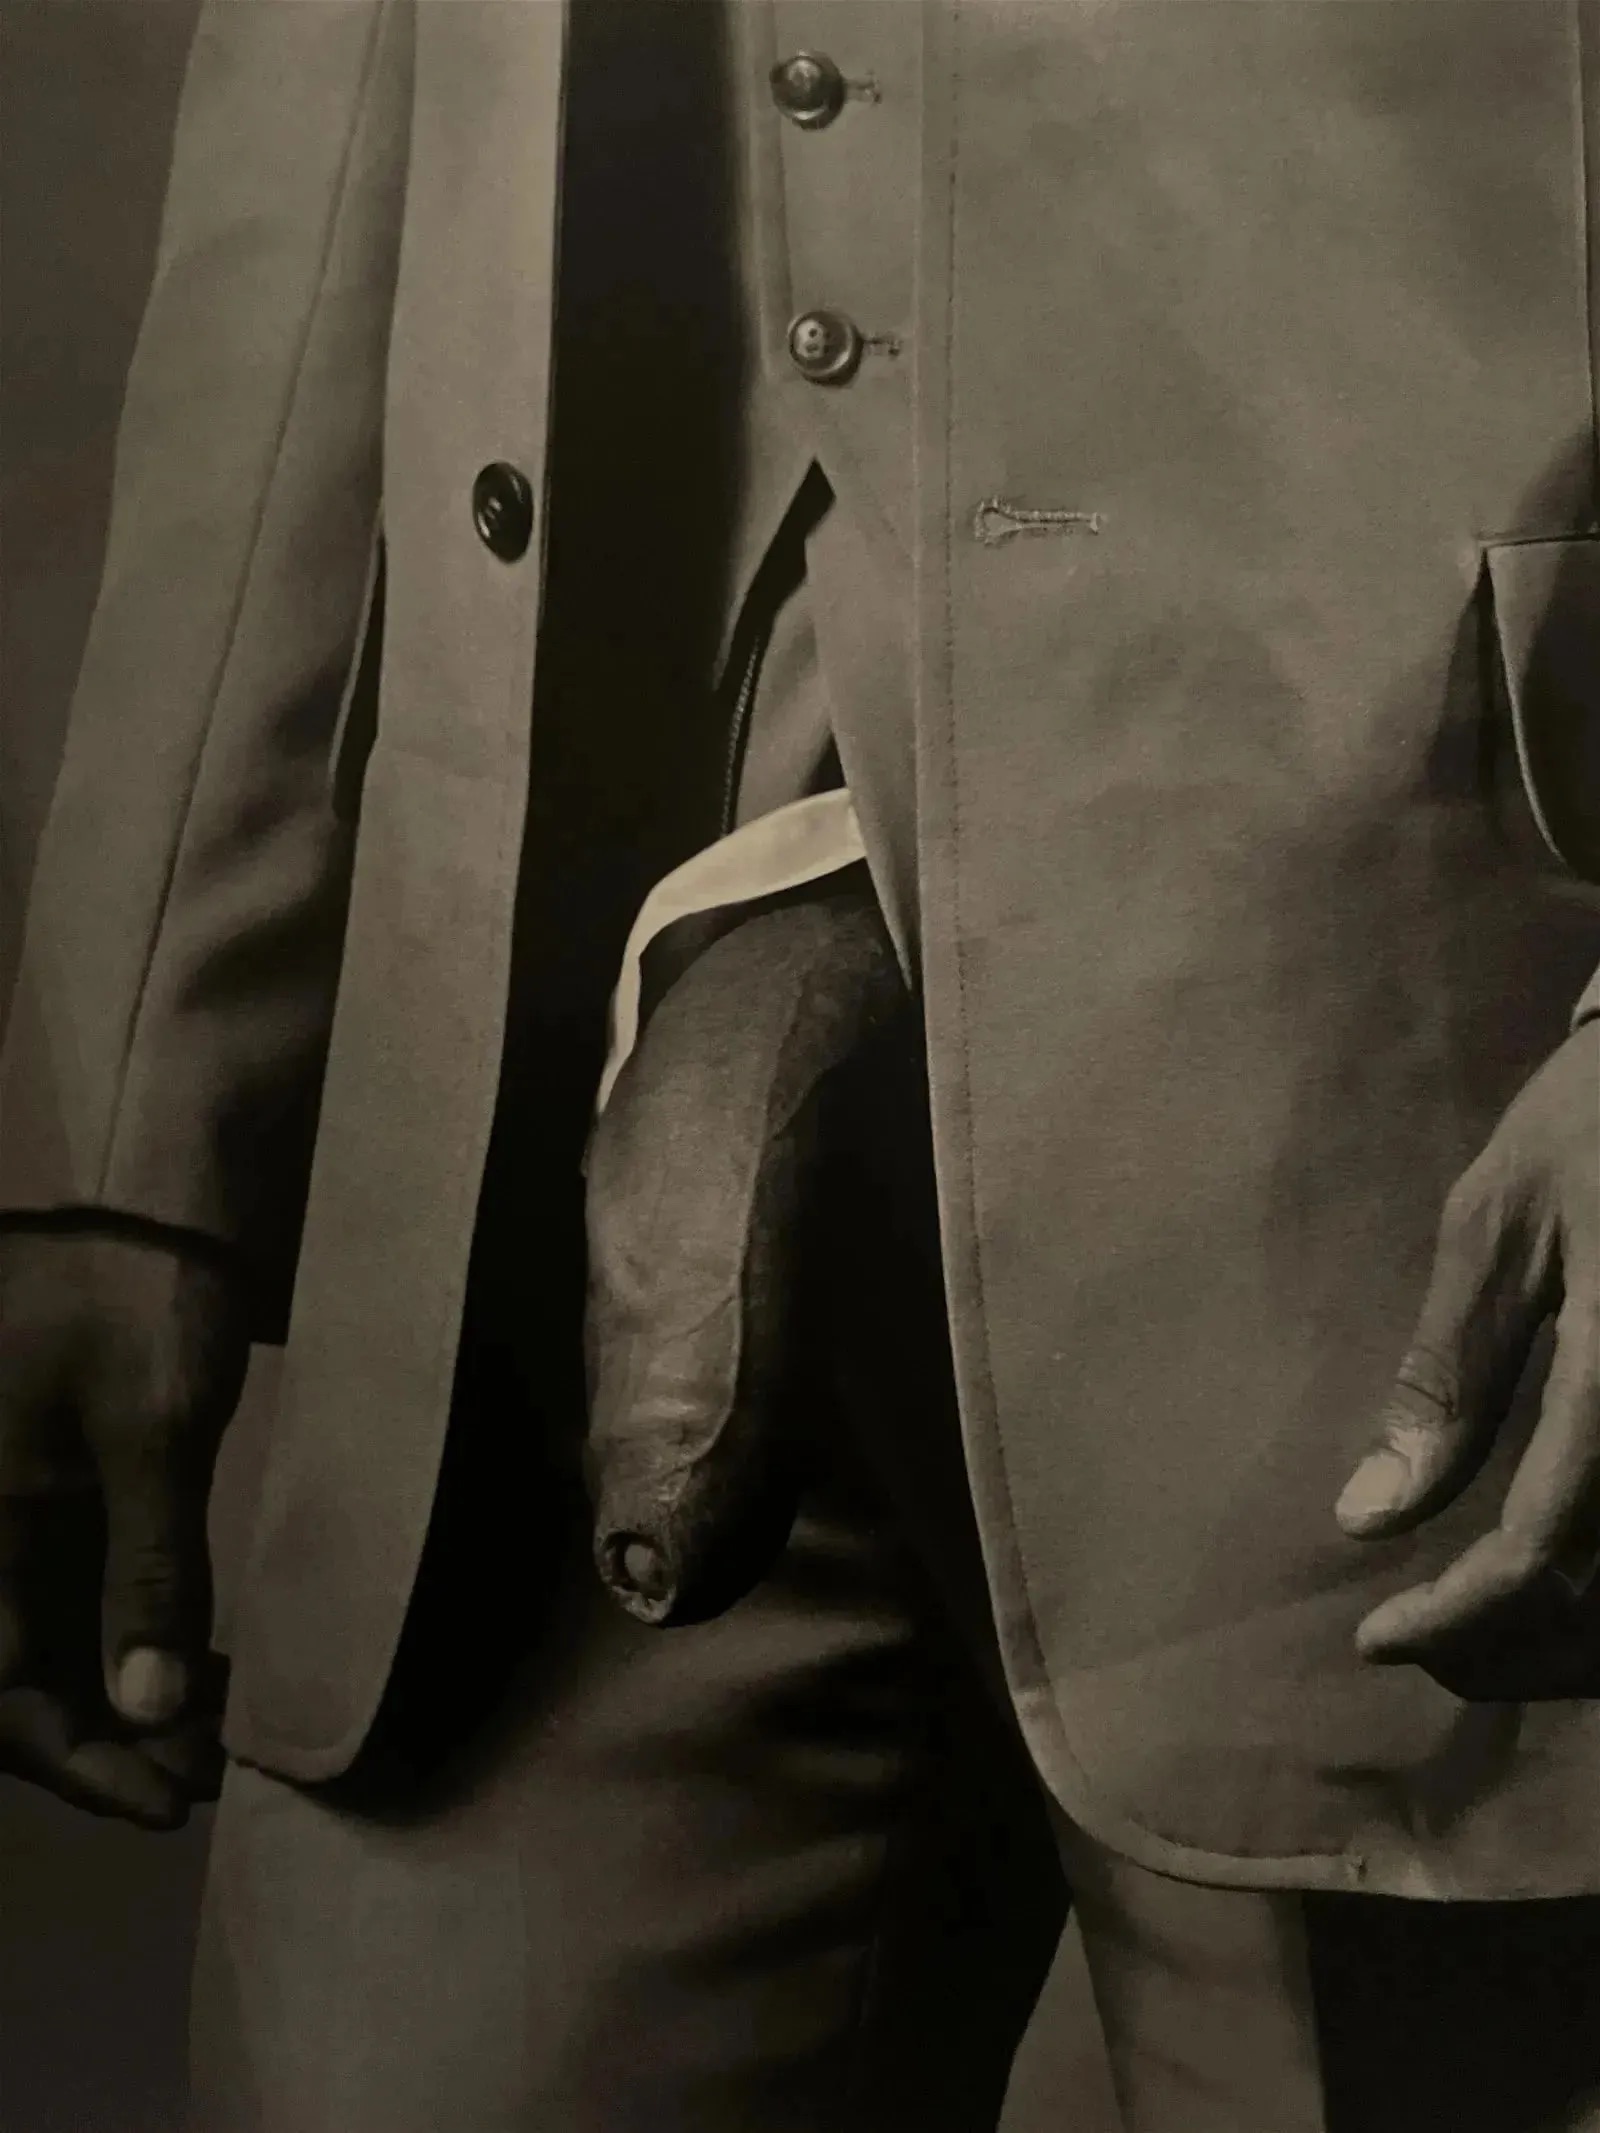 Robert Mapplethorpe "Man in Polyester Suit, 1980s" Print - Image 2 of 2